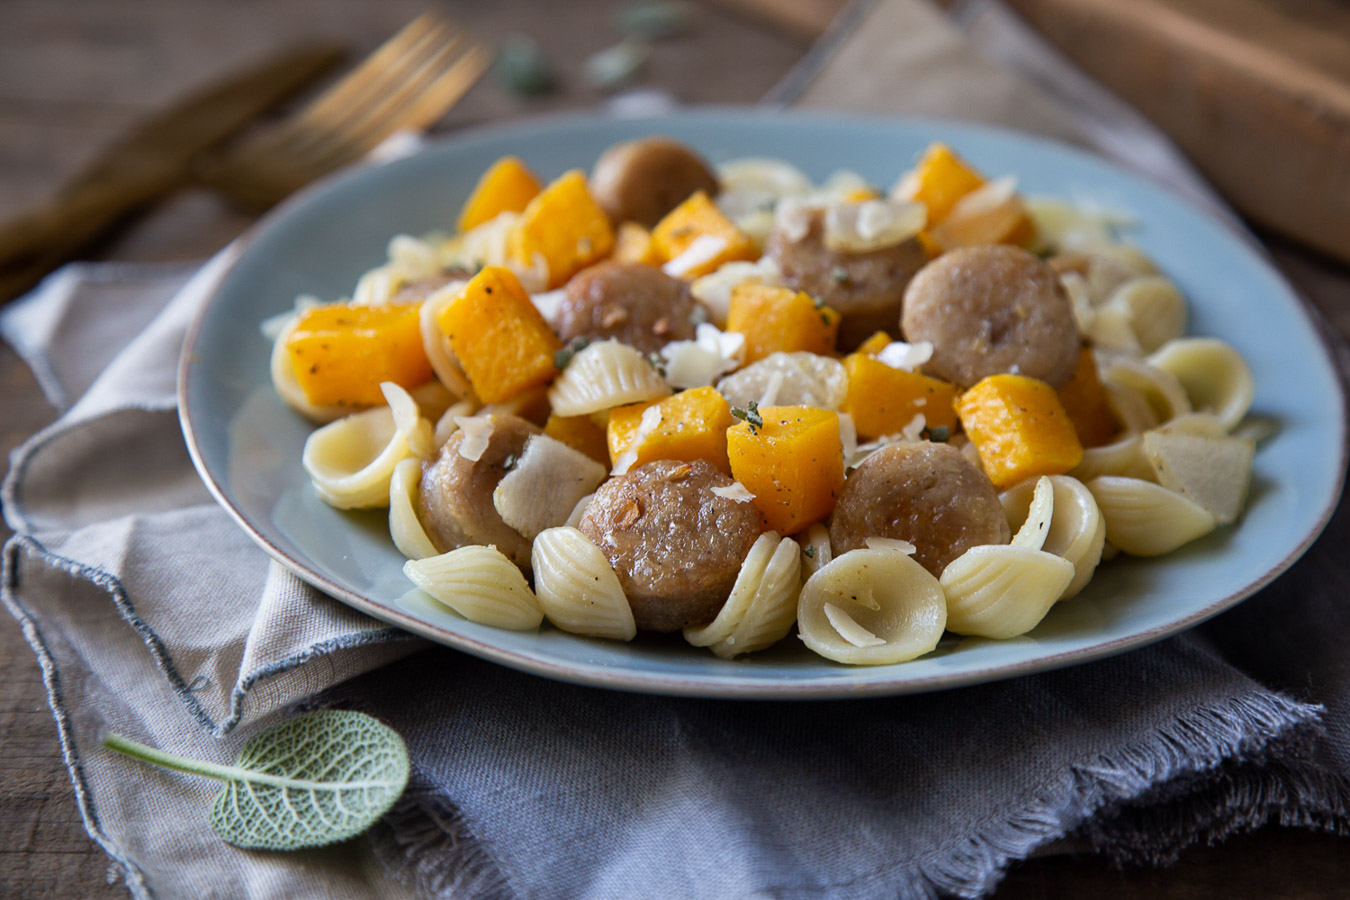 Pasta with Roasted Squash + Sausage